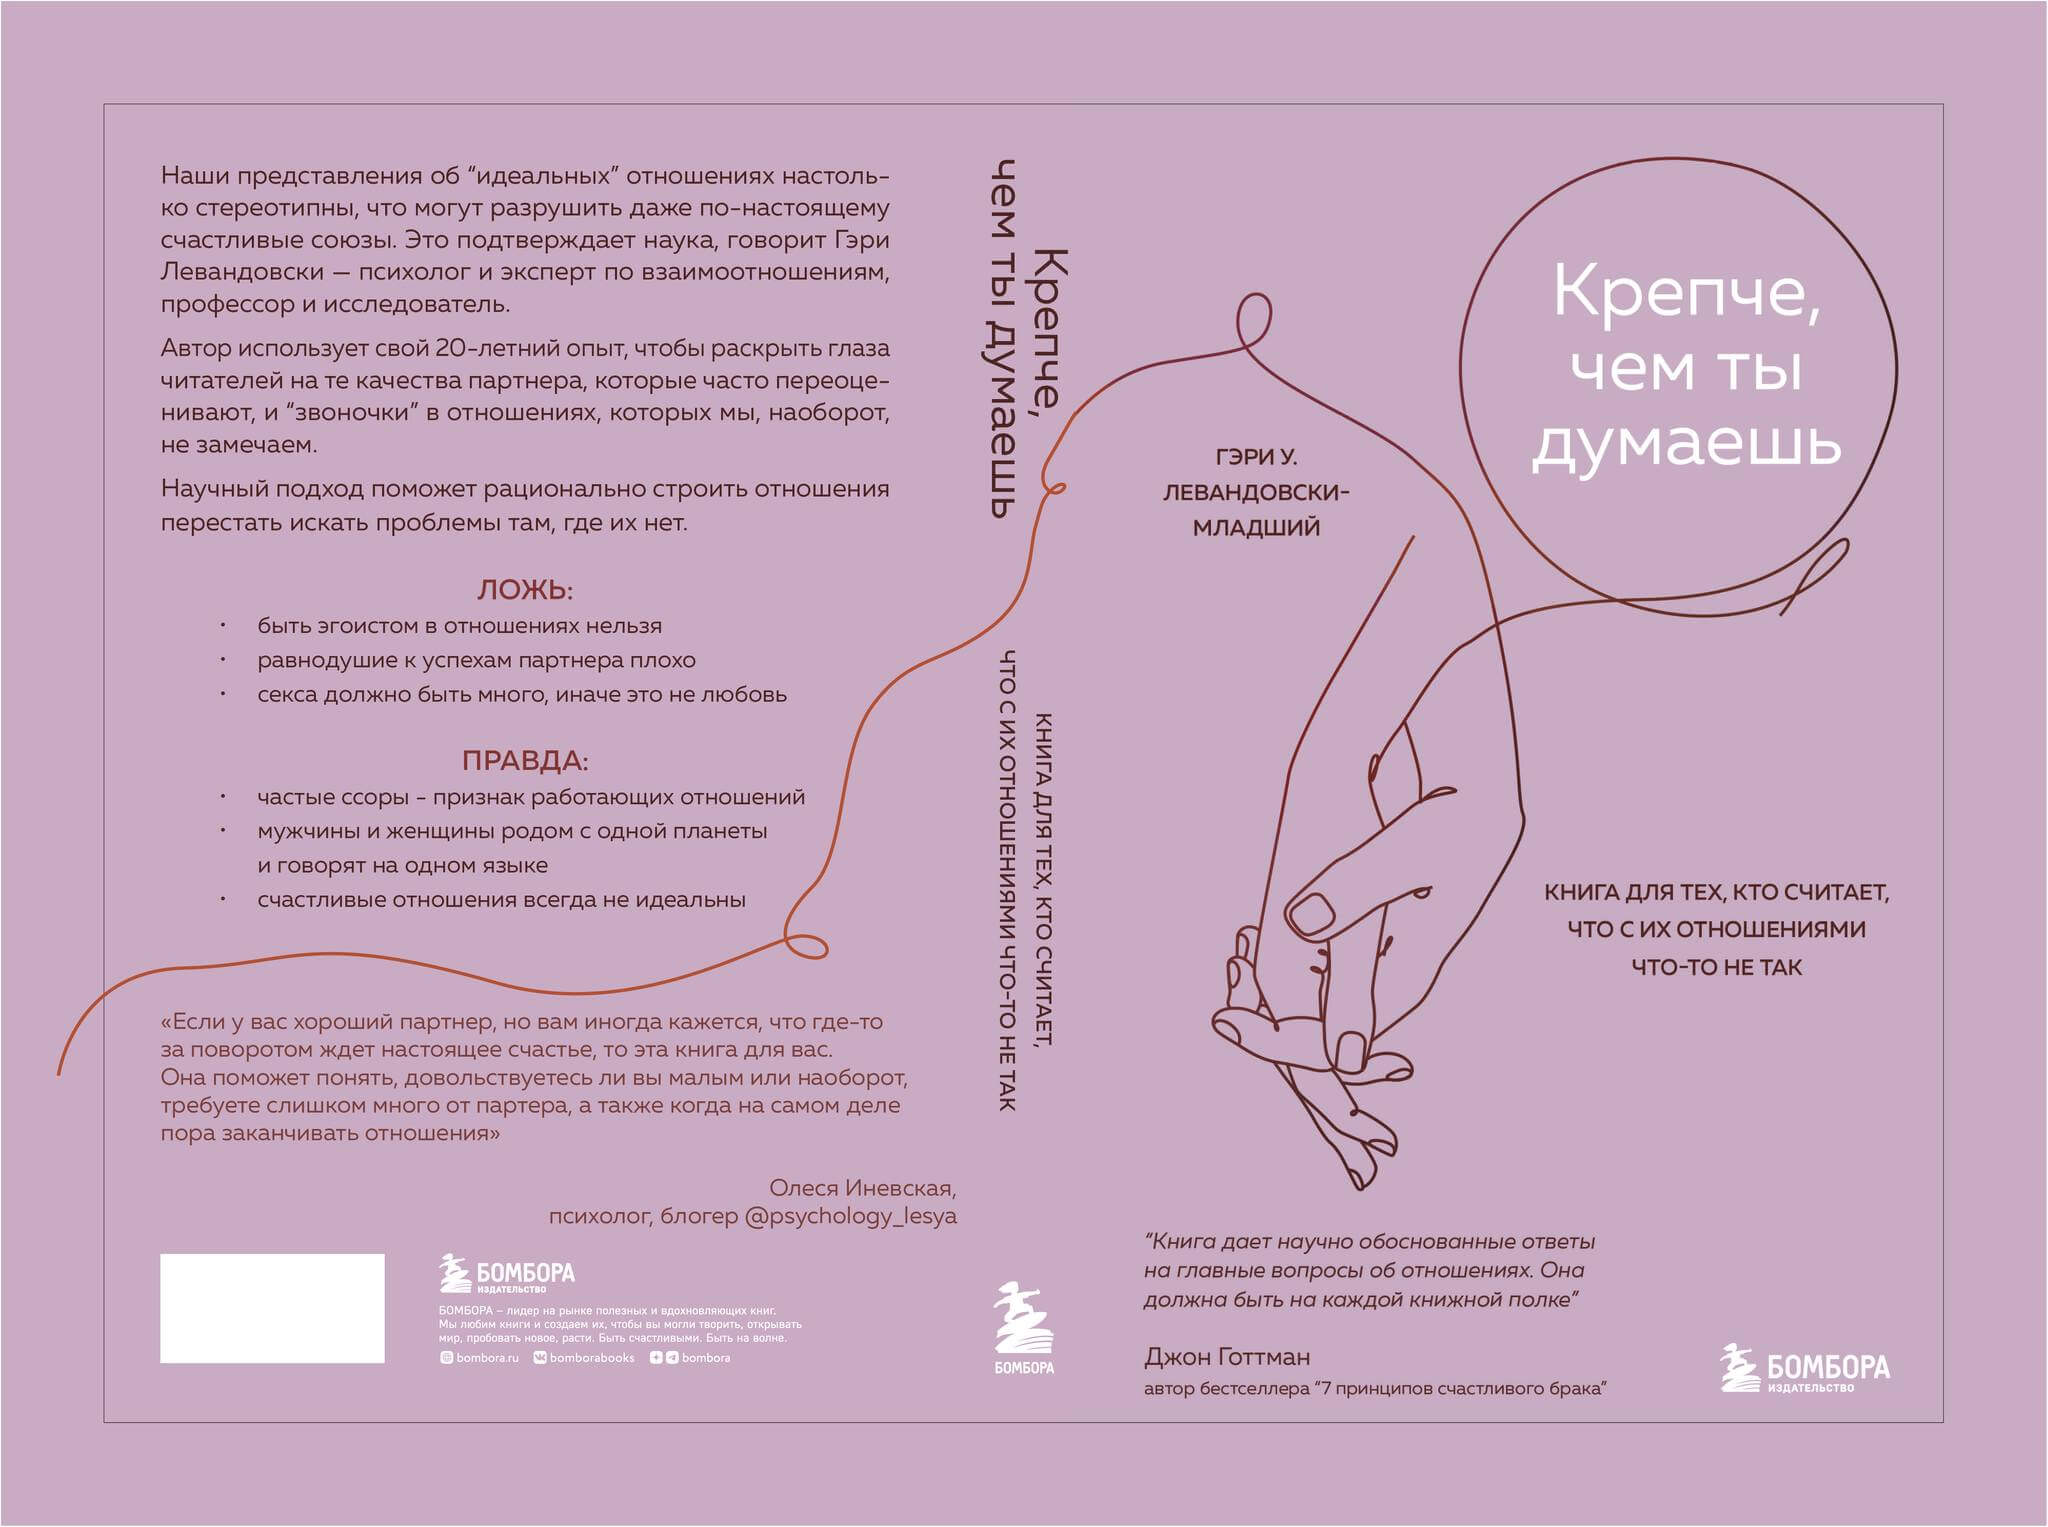 Cover of book, which is Russian translation of "Stronger than you Think" by prof. Lewandowski